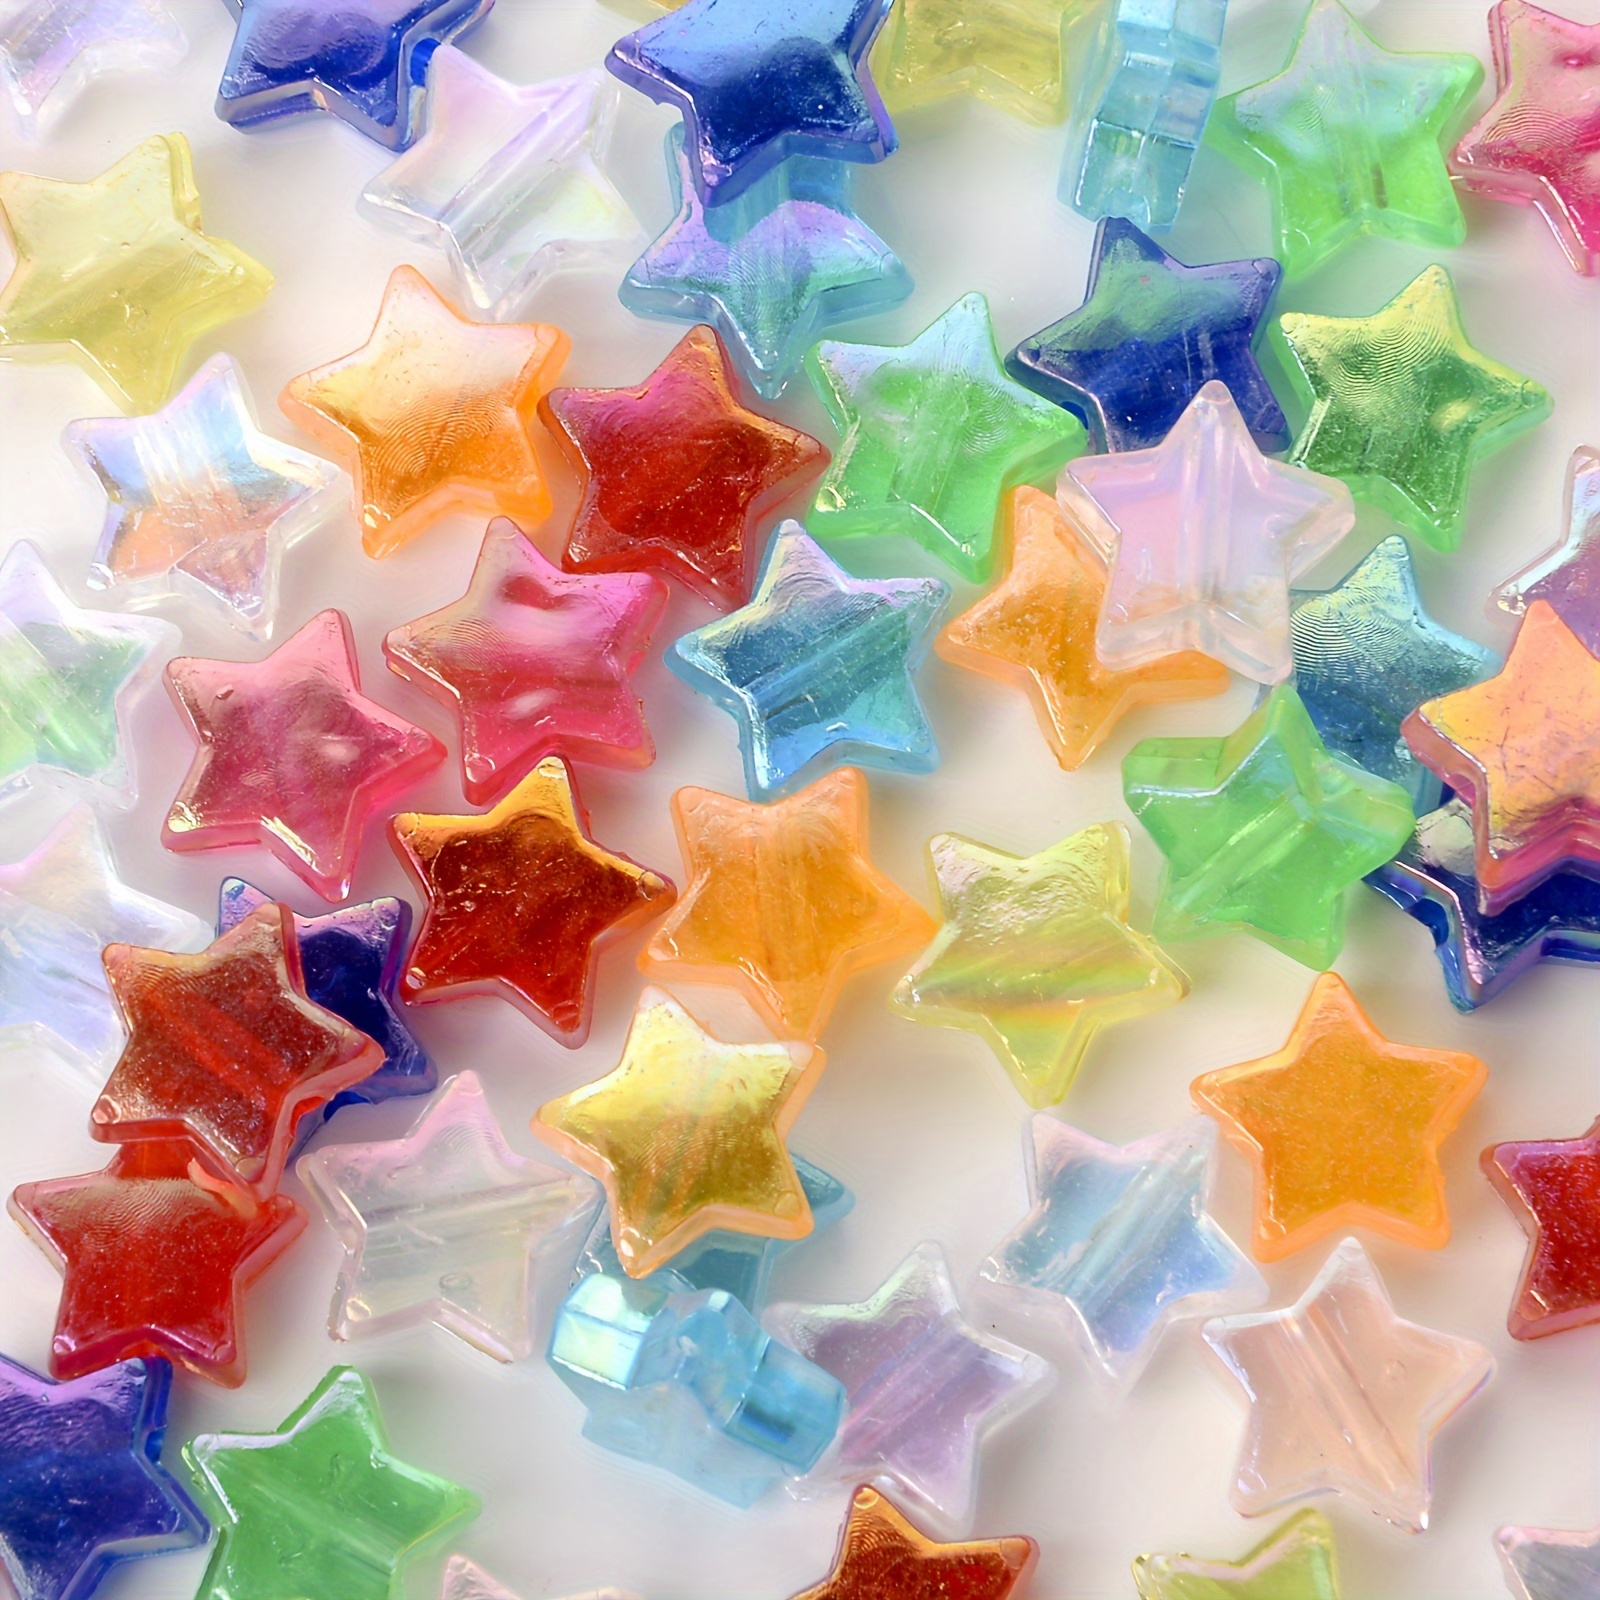 Craft Beads, 5-Pointed Star Shaped Crafts Supplies Colorful Plastic Beads  For Bracelets Earrings For Making Necklaces 